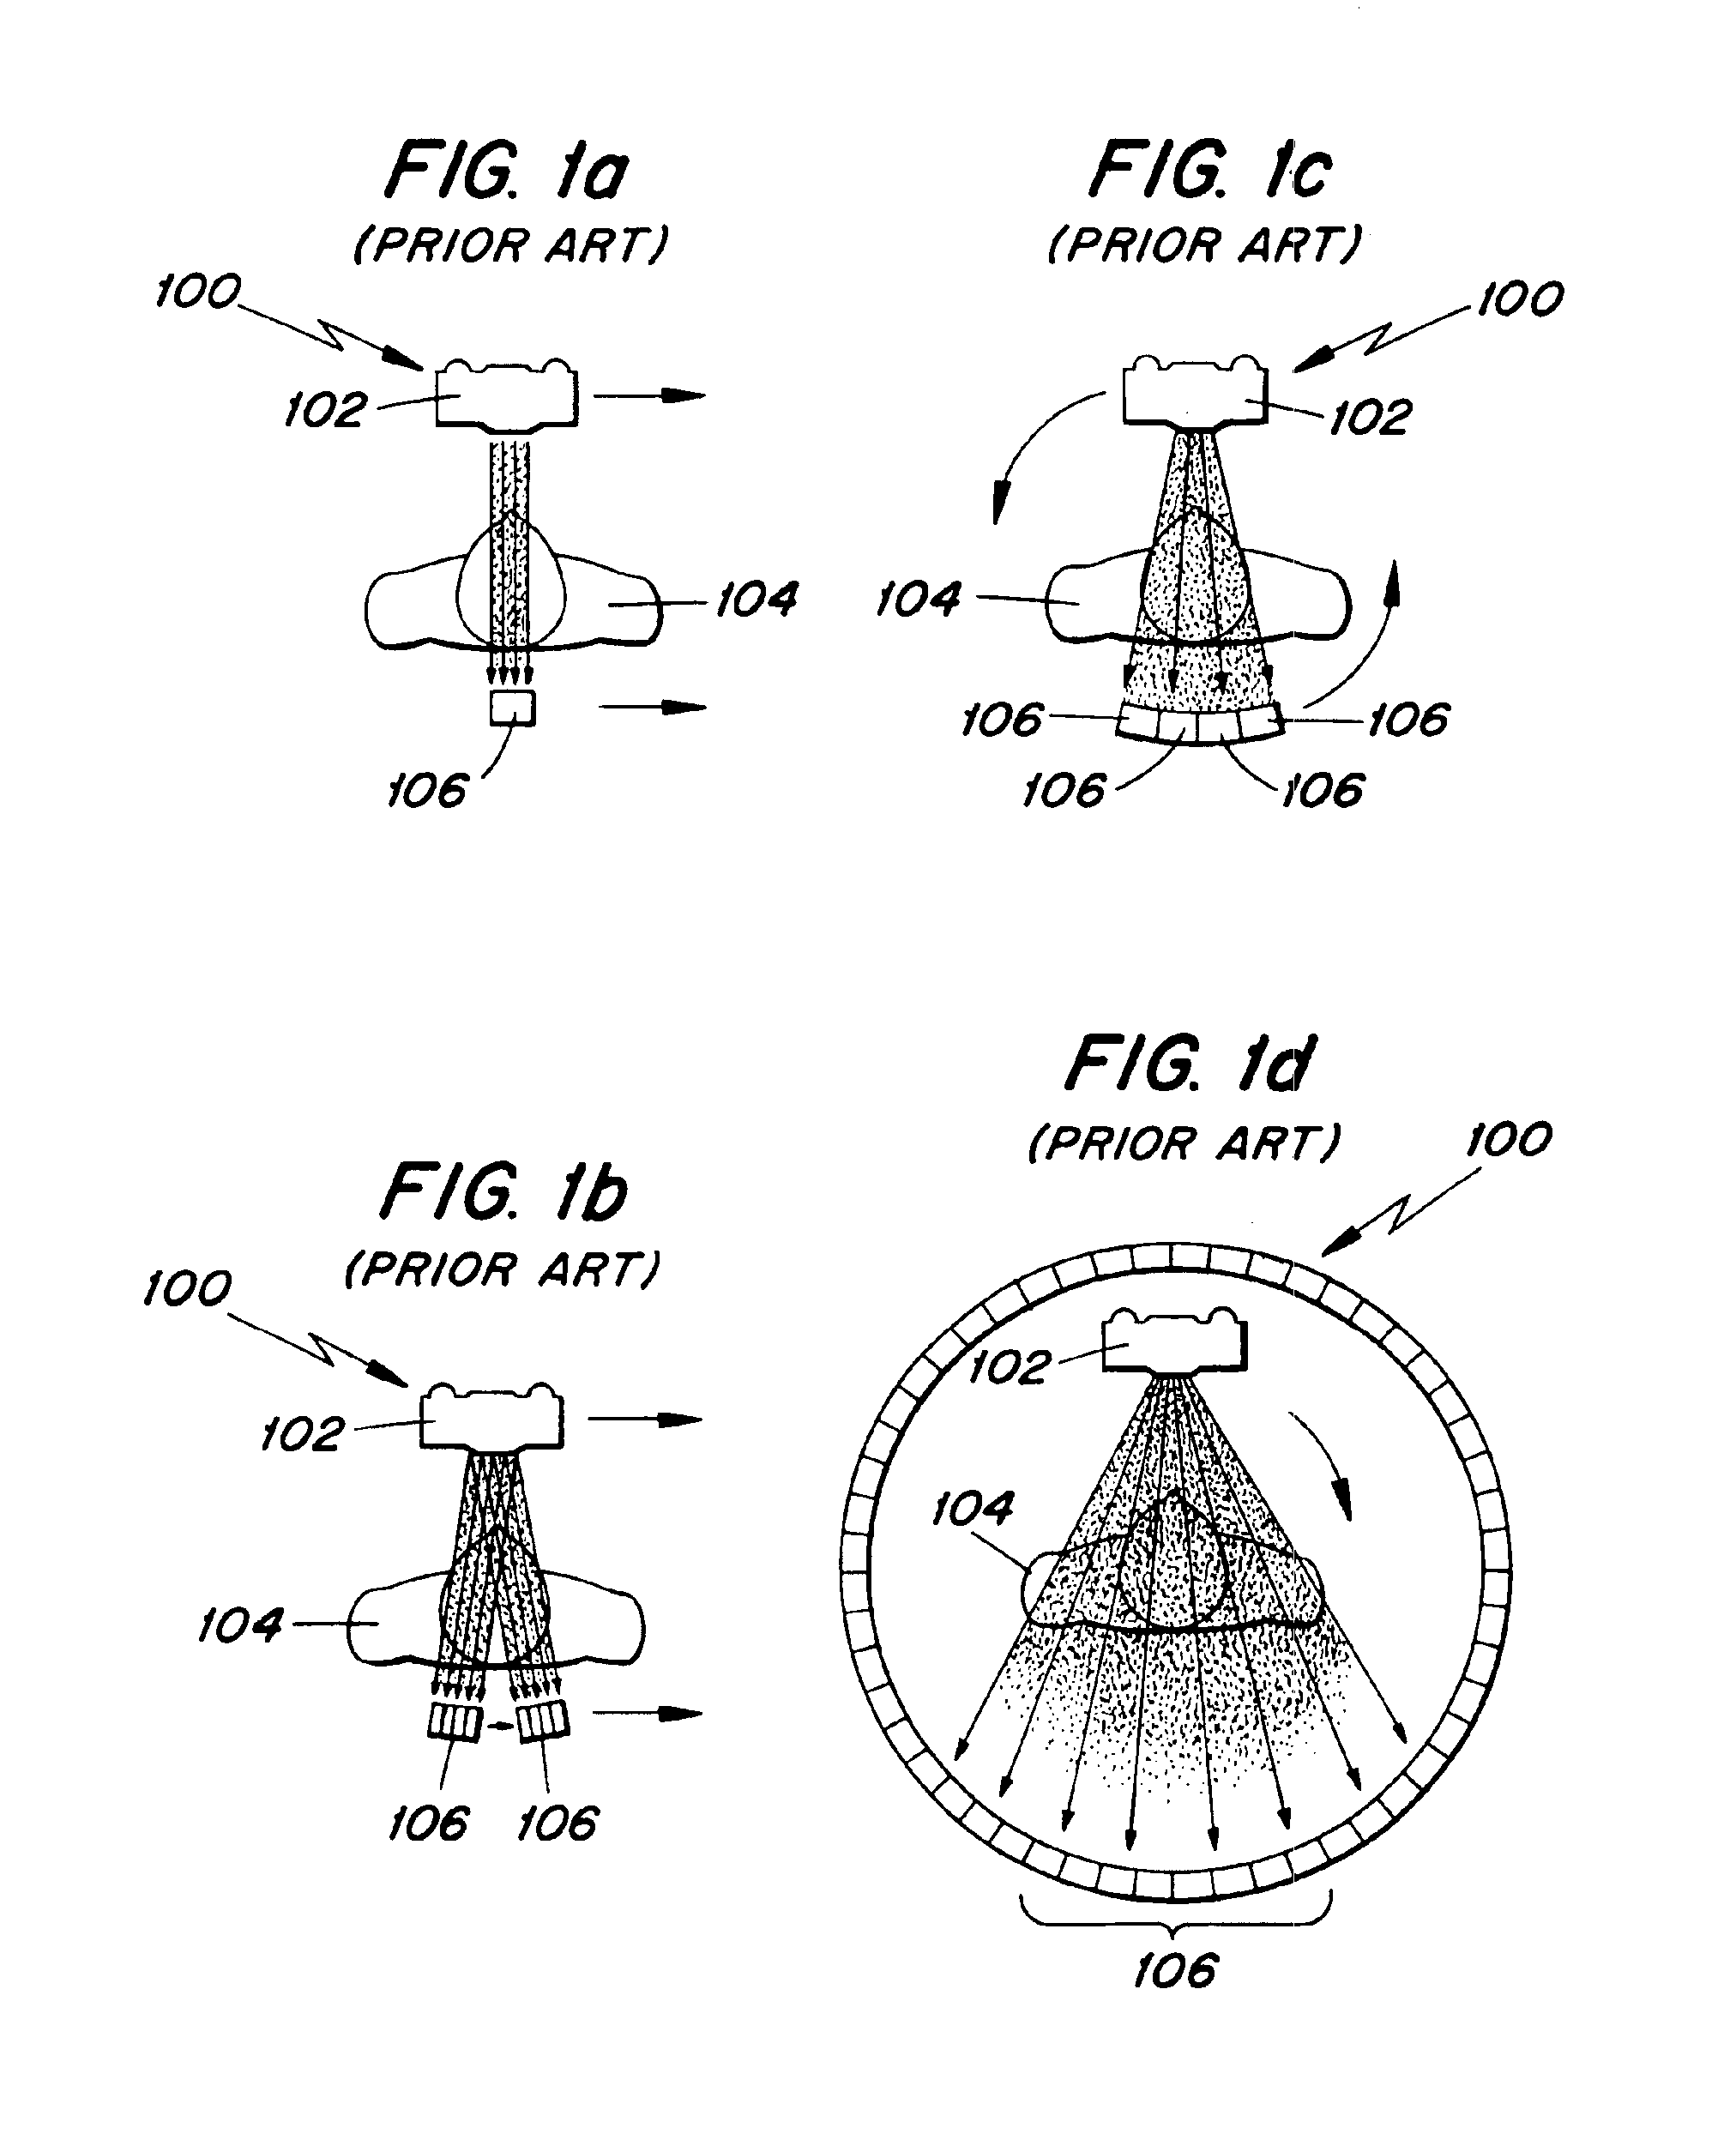 Large-area individually addressable multi-beam x-ray system and method of forming same